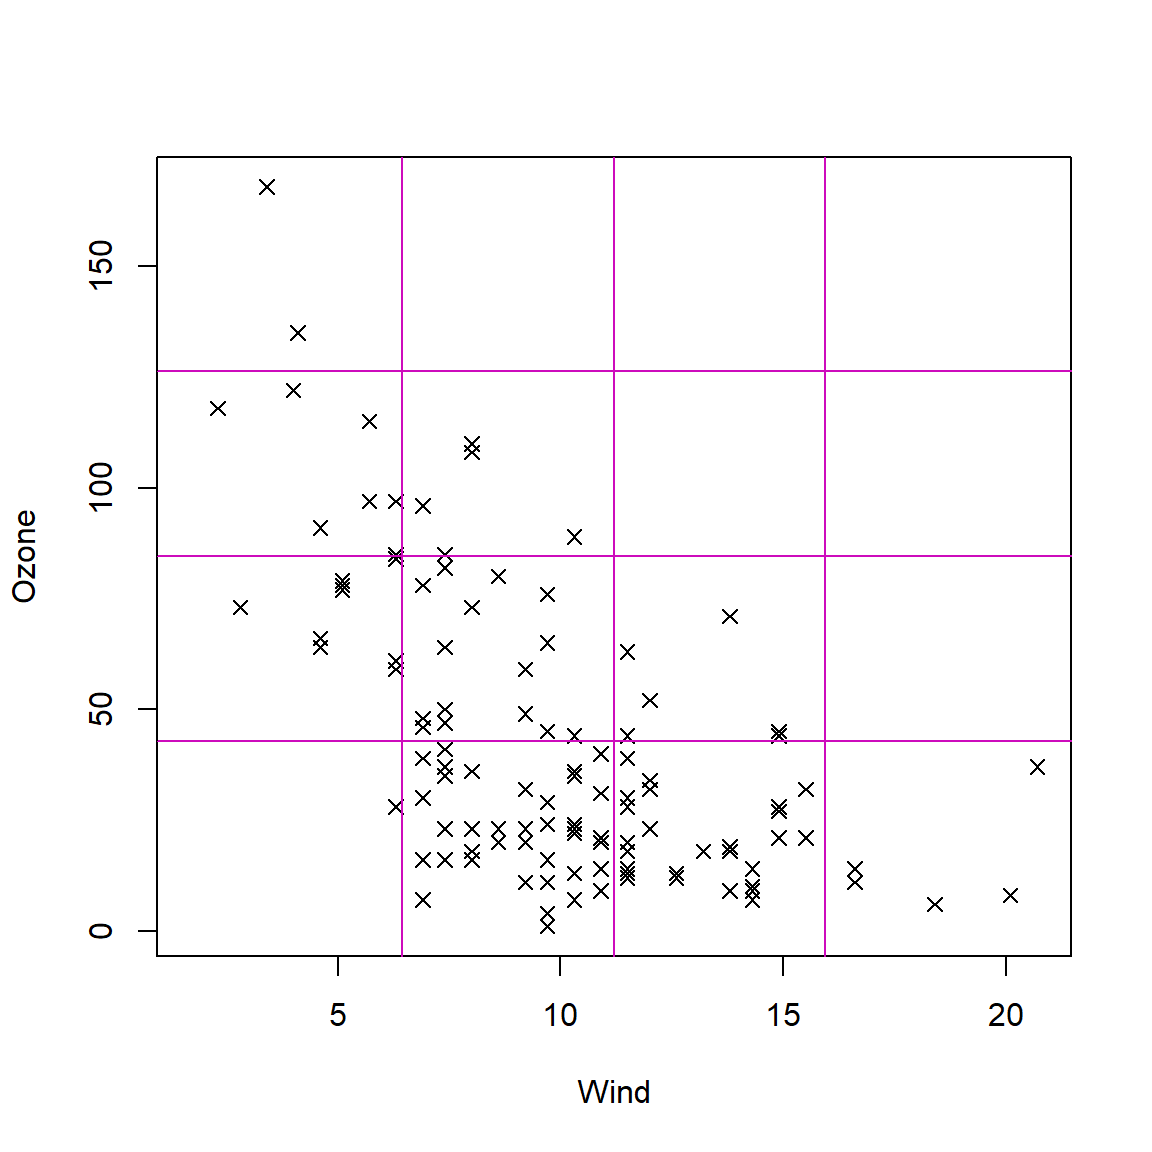 Scatter plot of Ozone versus Wind with grid lines added.